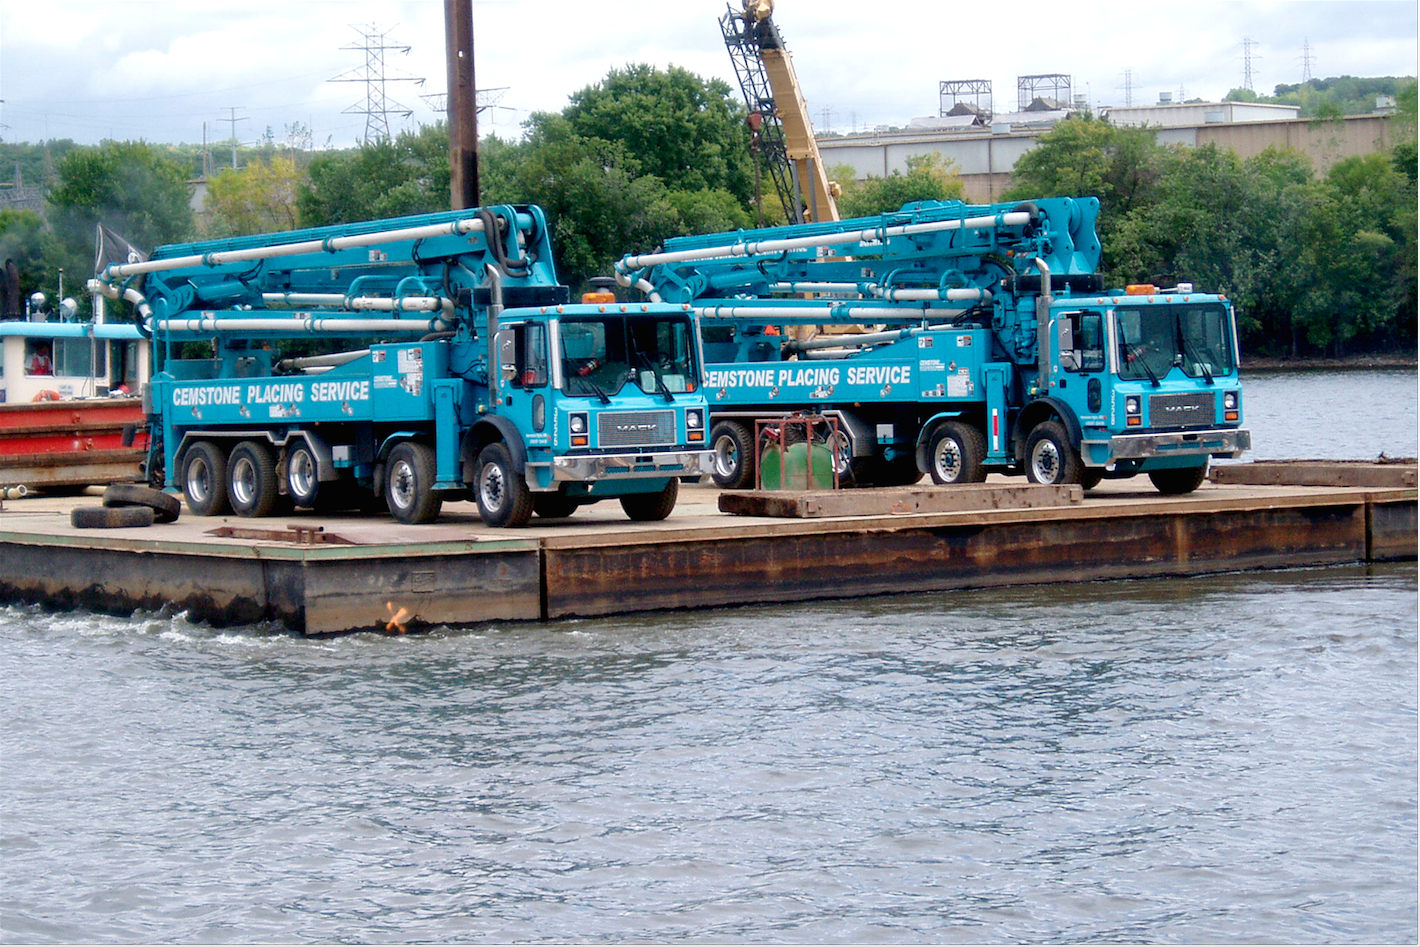 CEMSTONE AND SCHWING PUMP THROUGH CHALLENGES ON BRIDGE PROJECT SPANNING THE MISSISSIPPI